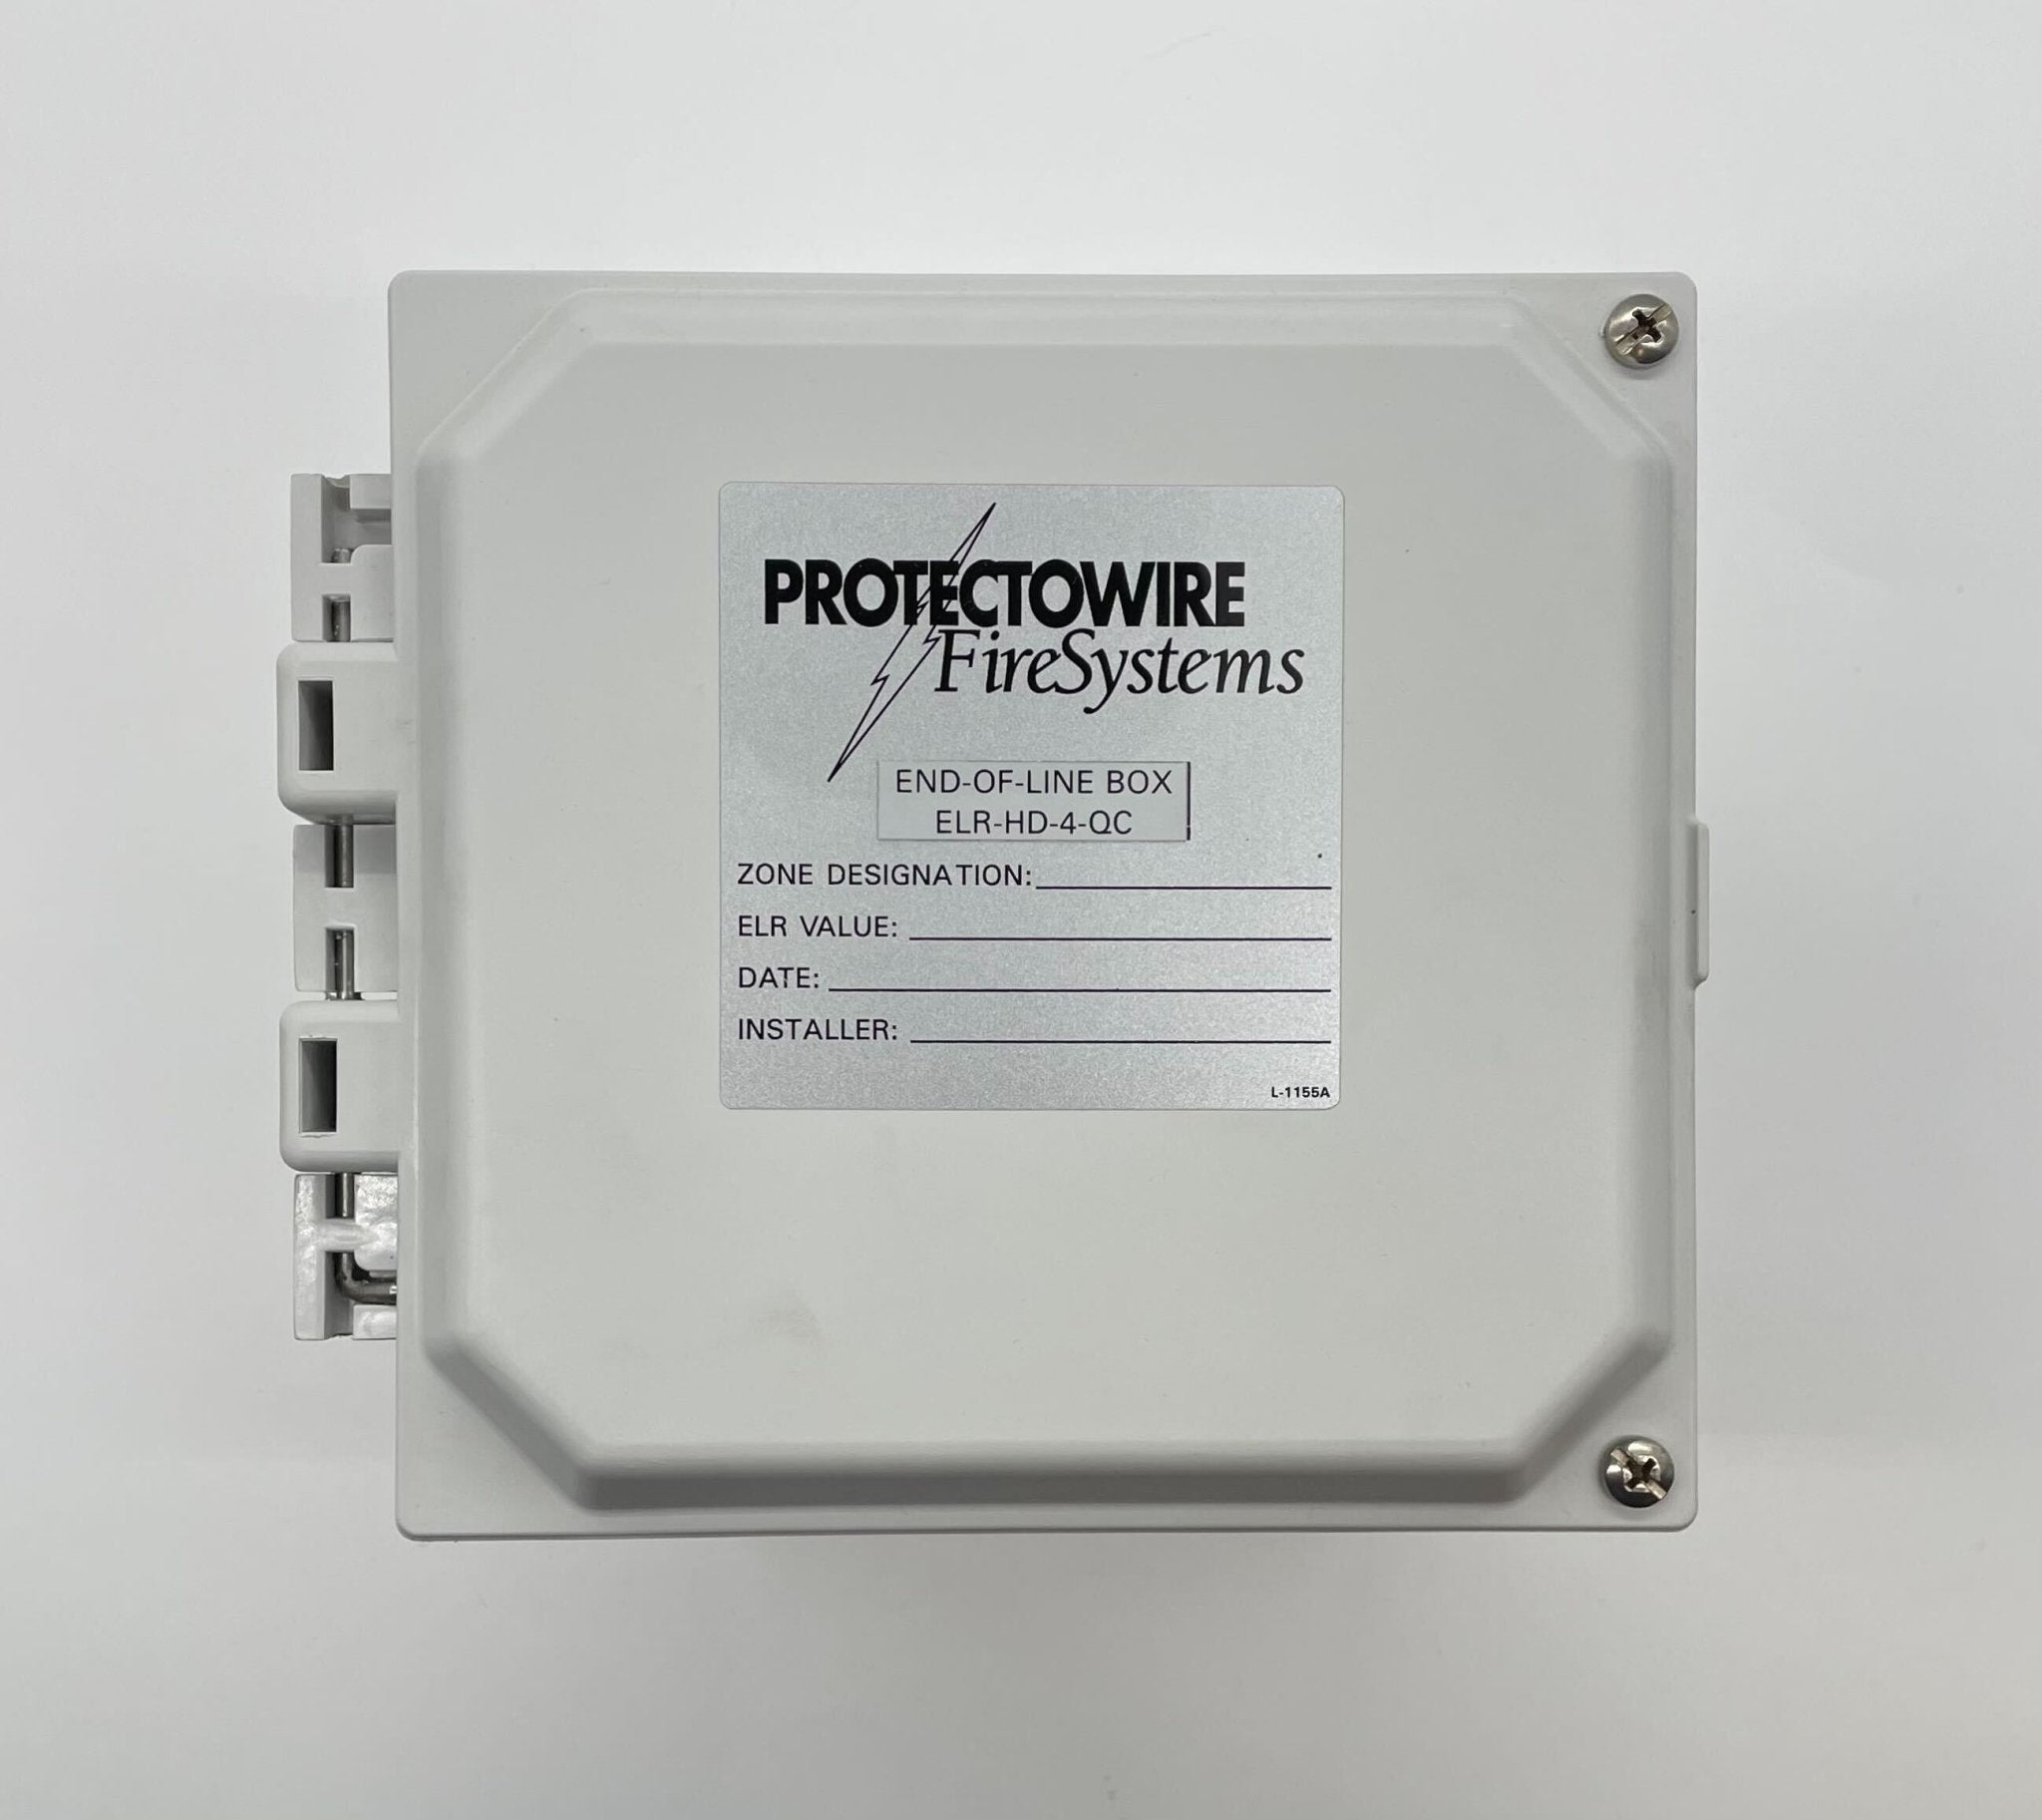 Protectowire ELR-HD-4-QC - The Fire Alarm Supplier